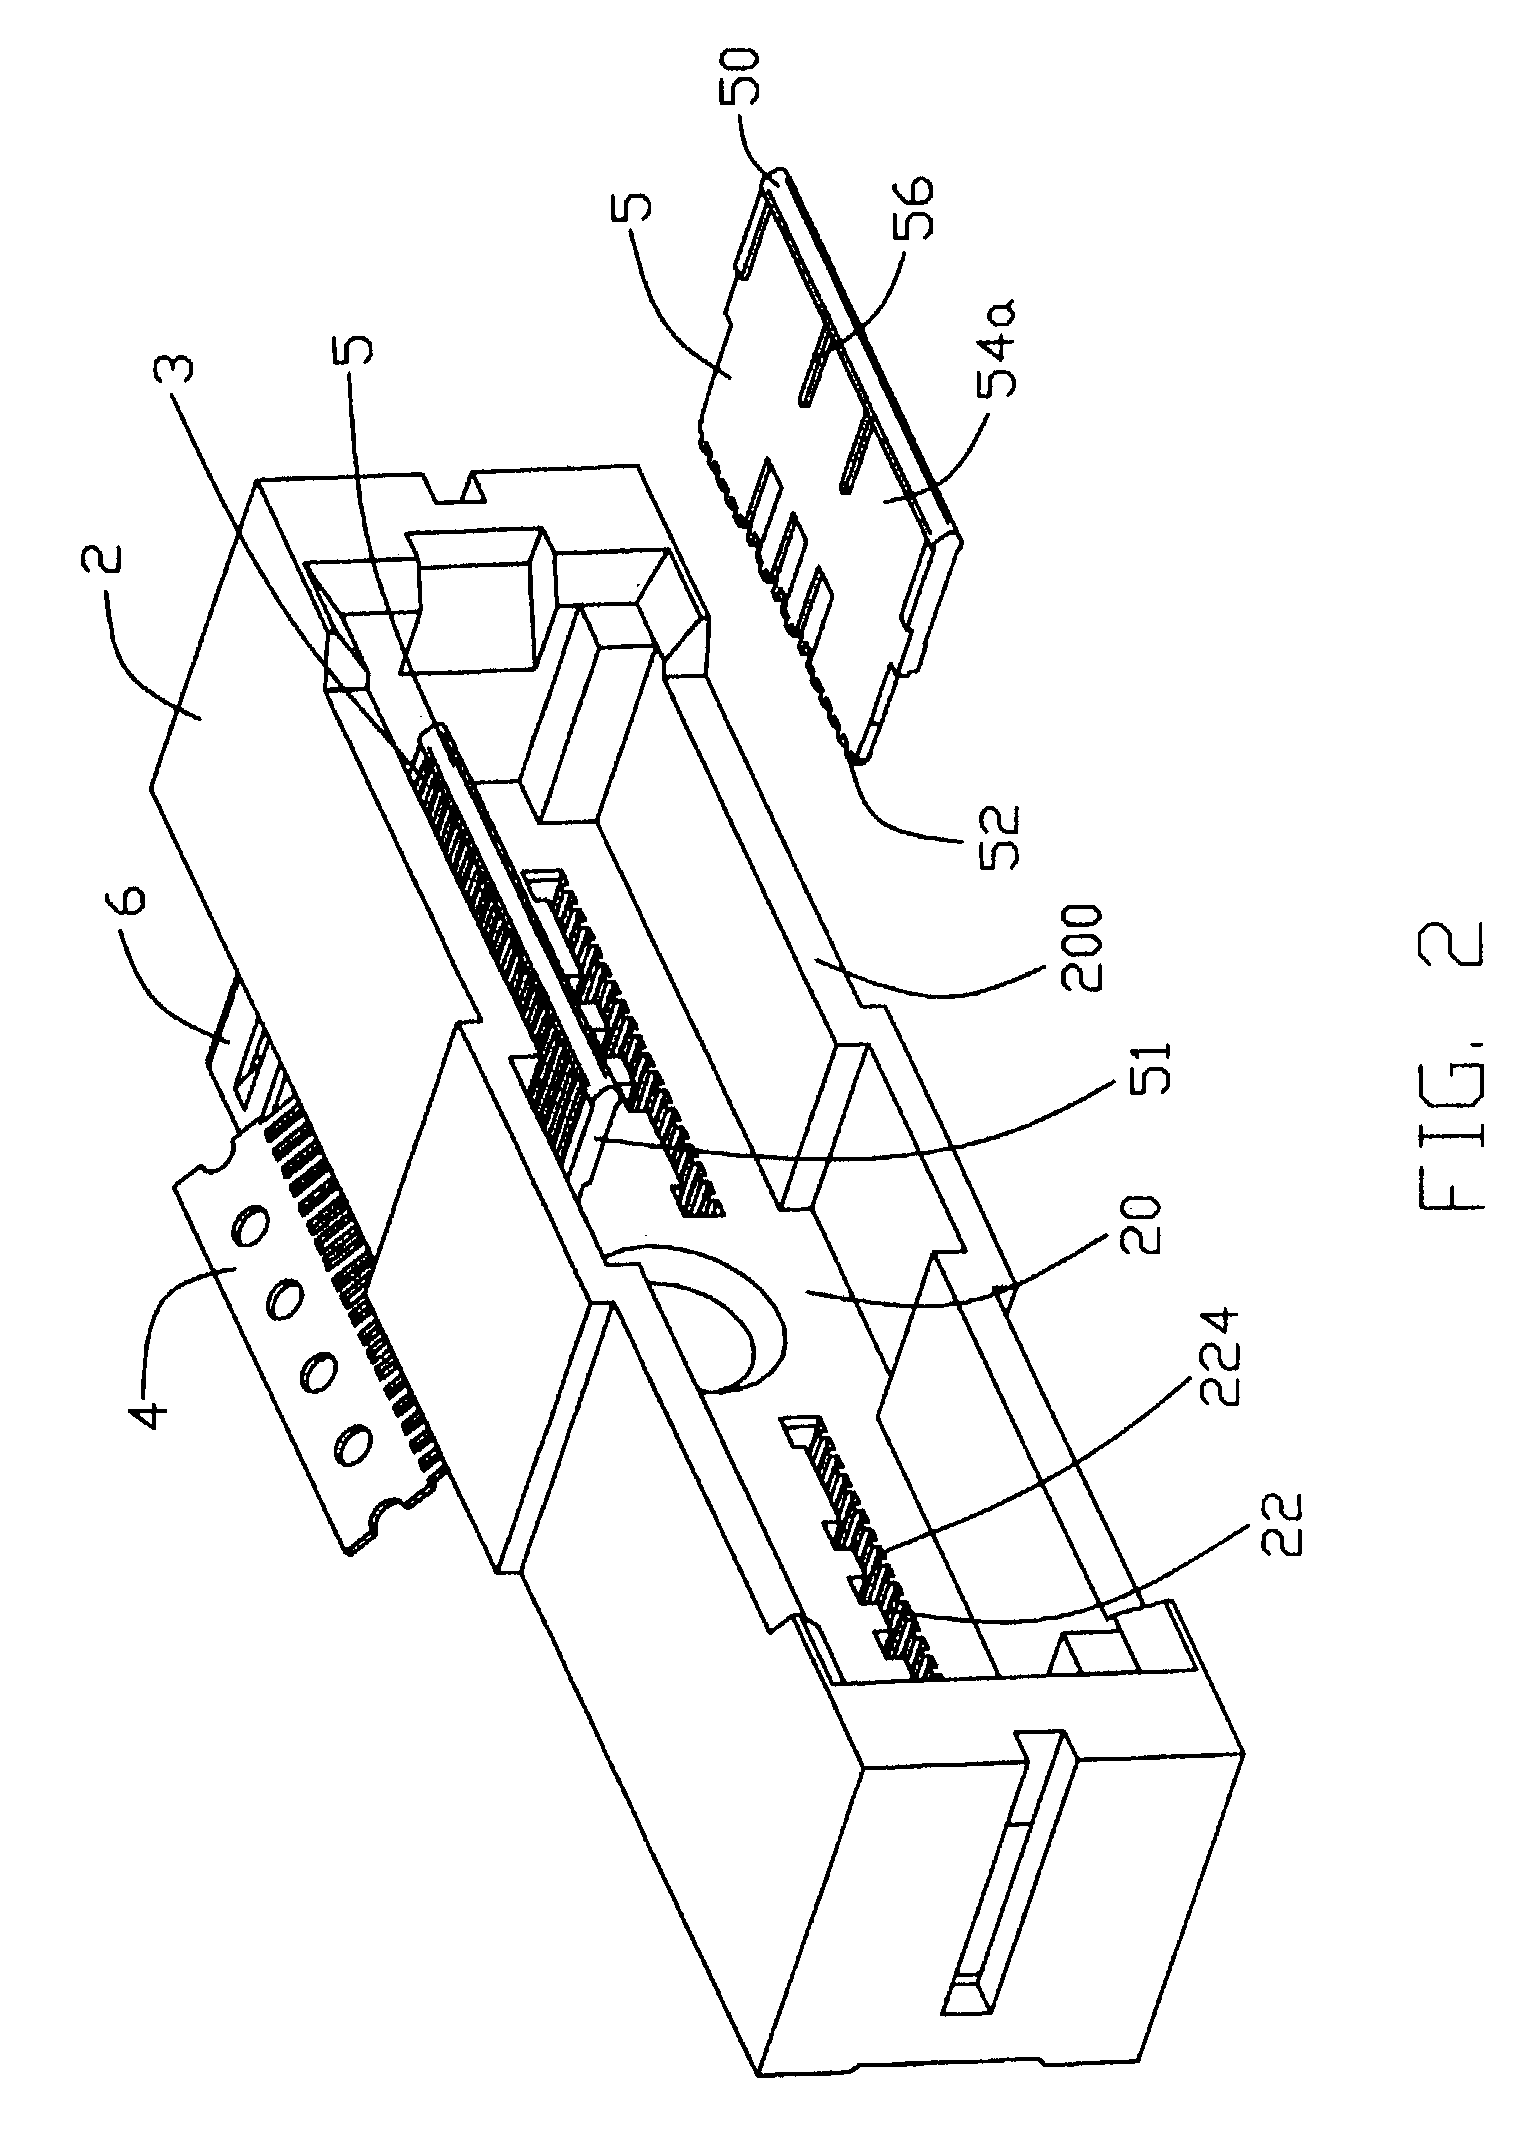 Method of making a straddle mount connector